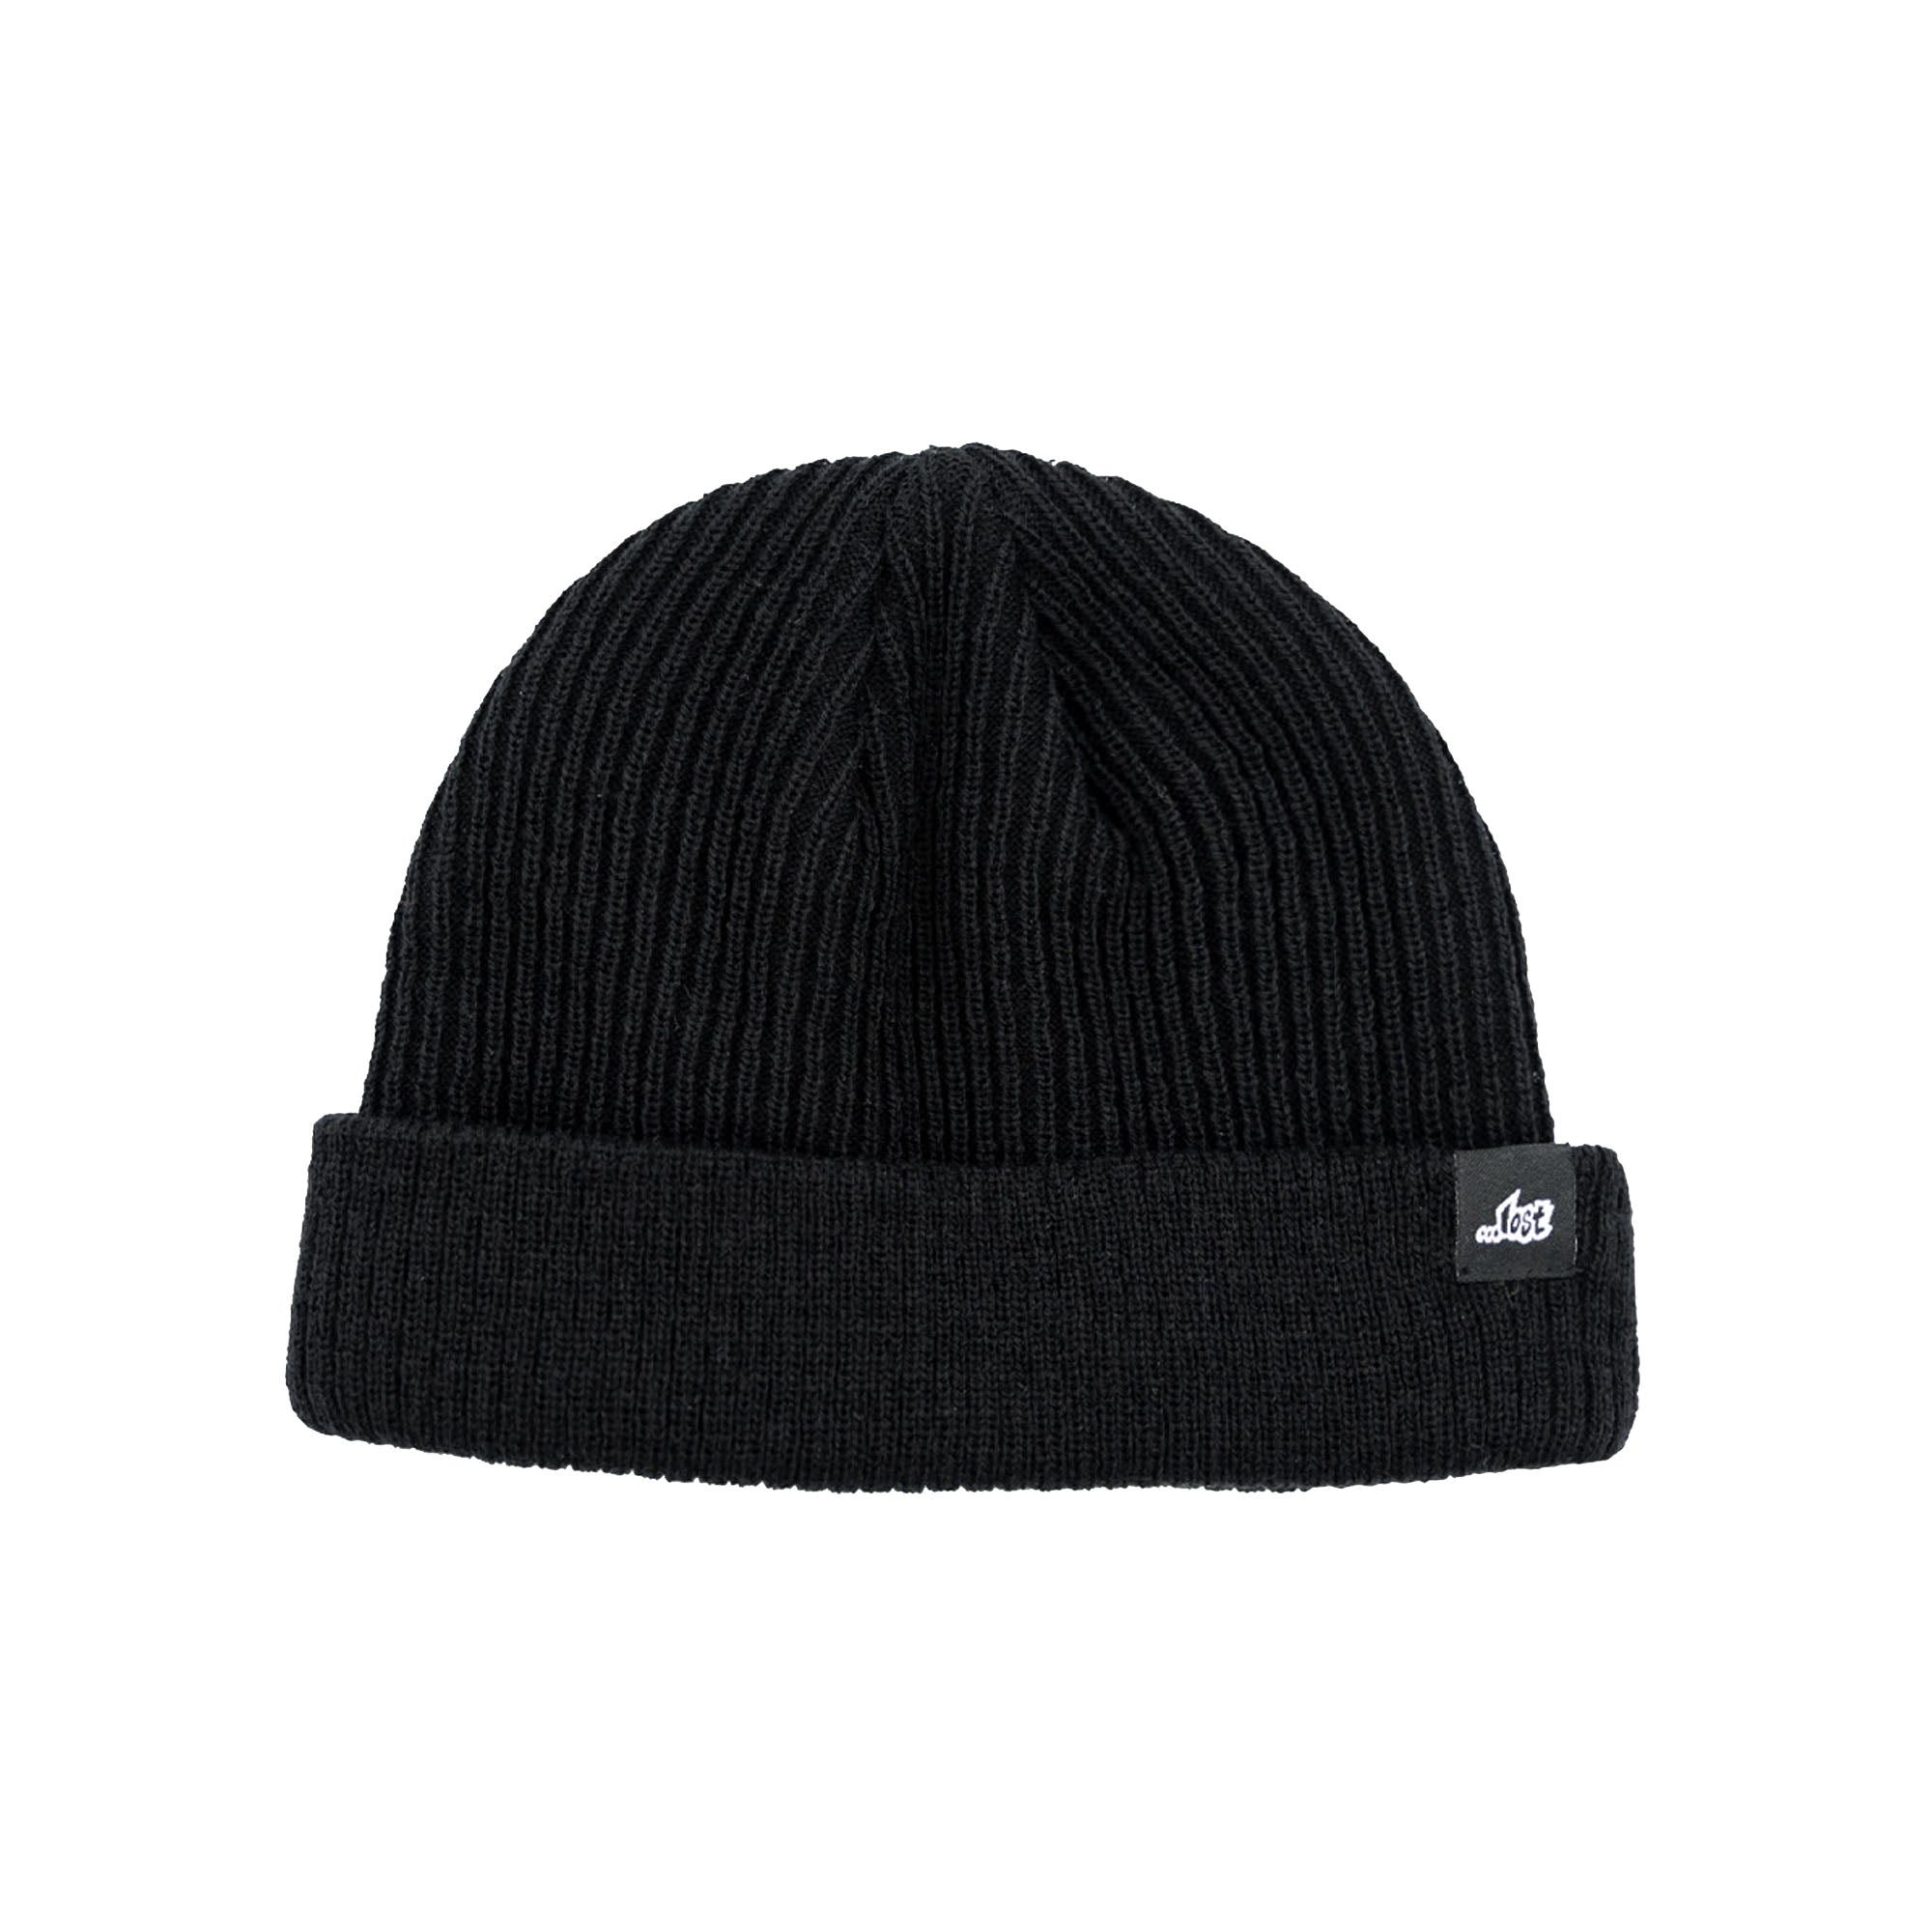 Lost Swell Men's Beanie